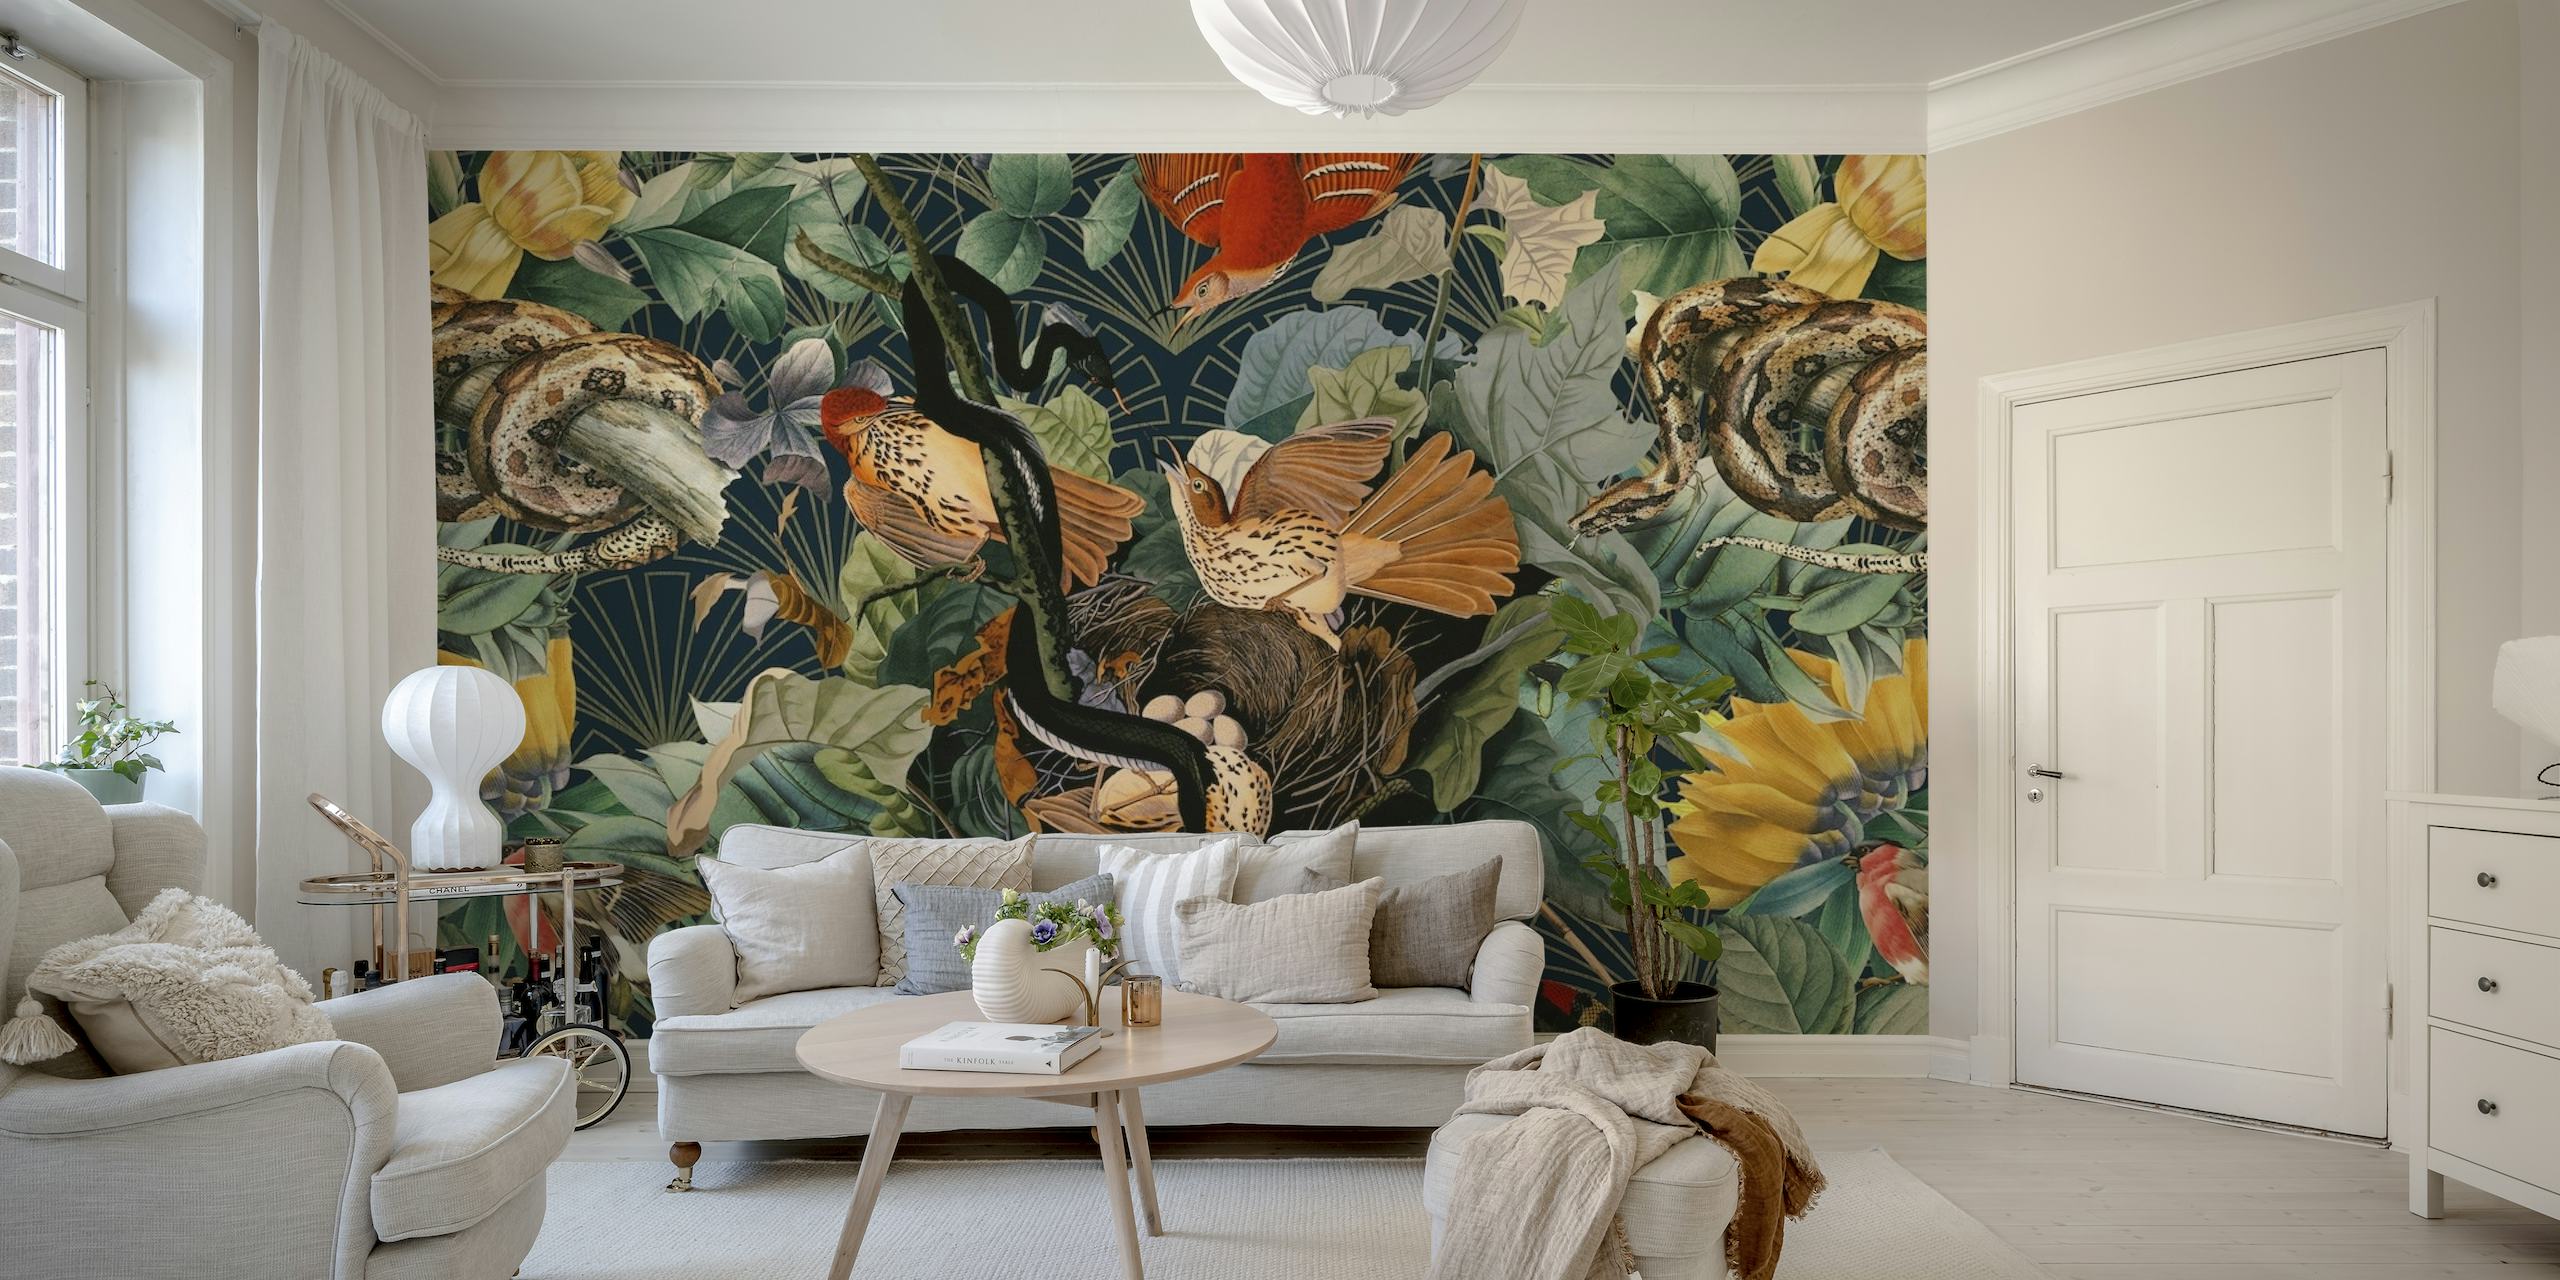 Vibrant wall mural featuring exotic birds and snakes amidst lush greenery